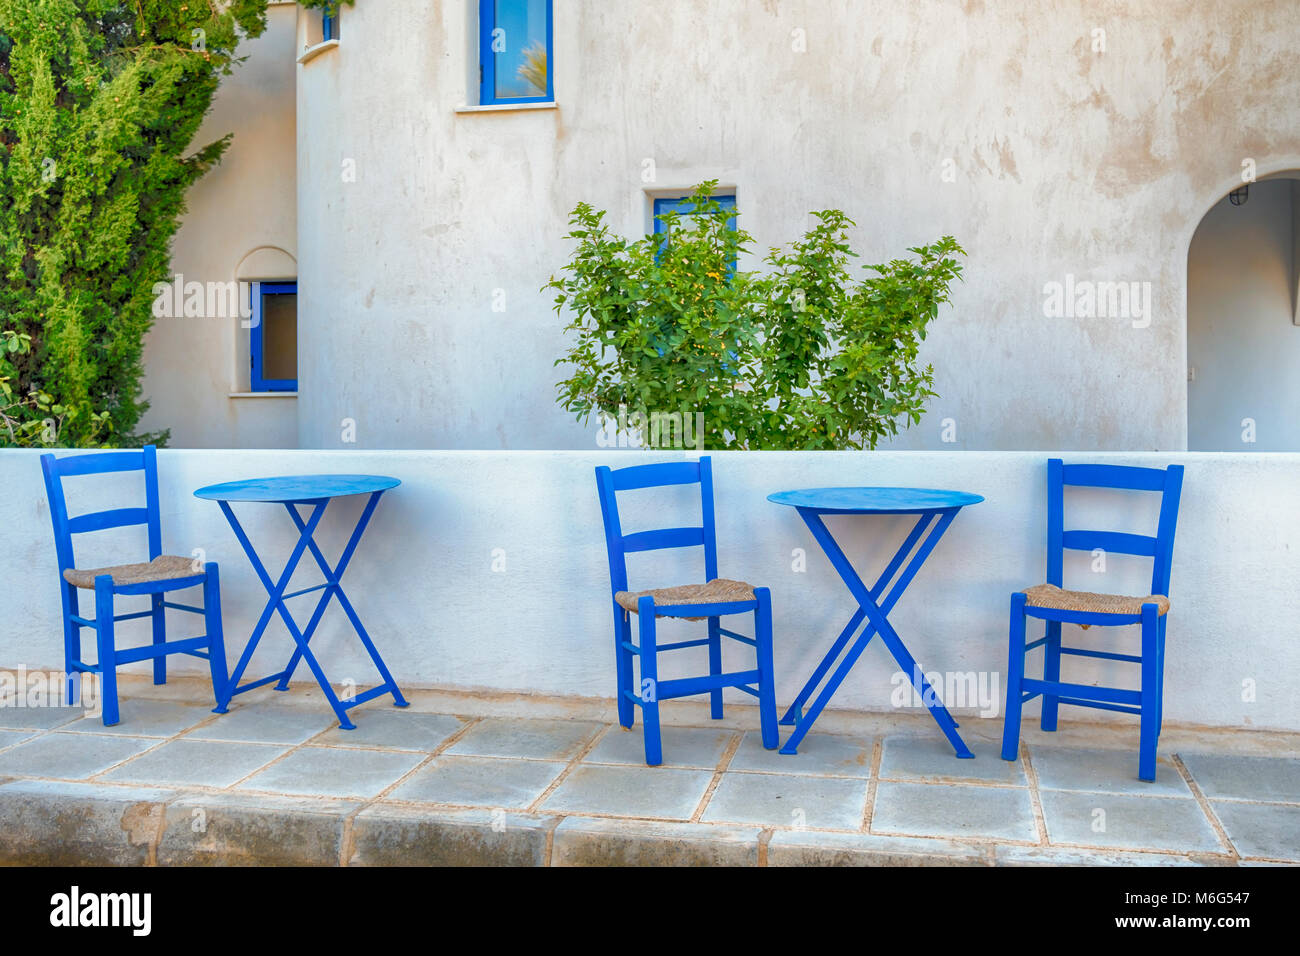 old greek blue chairs with wicker seating on a sun-drenched terrace at a vacation destination Stock Photo